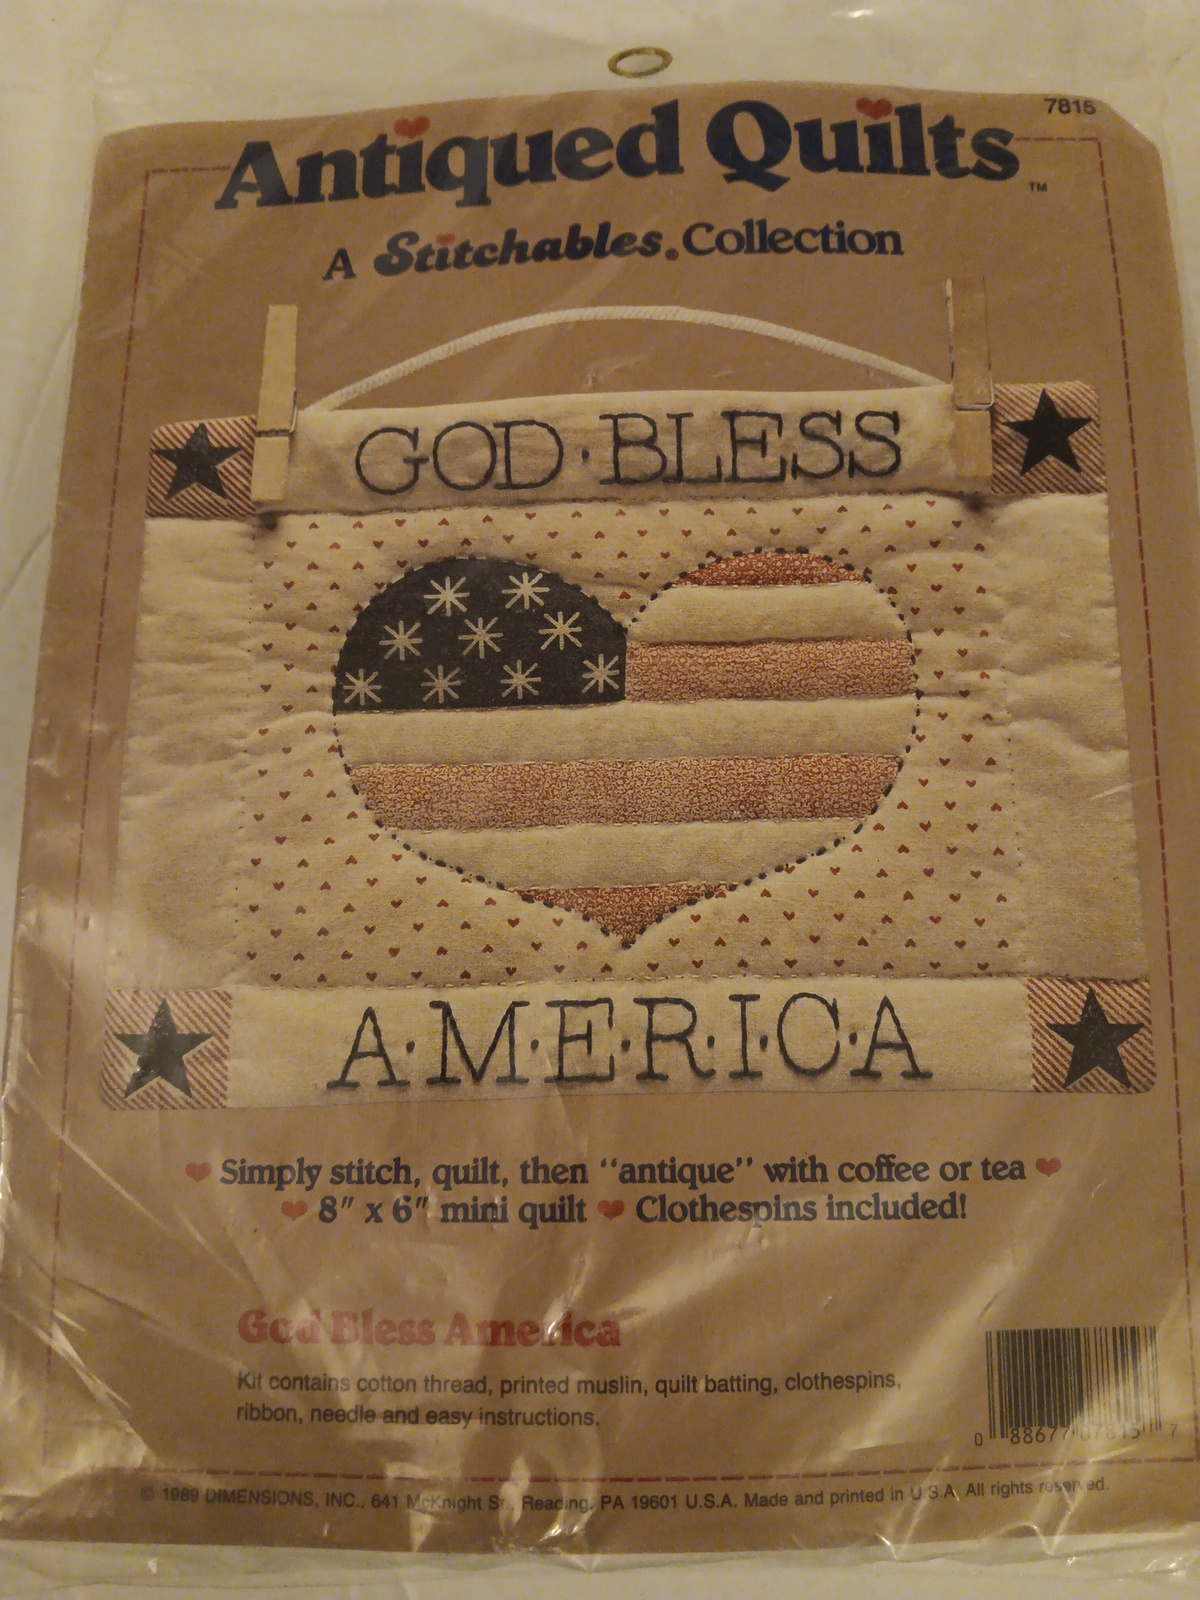 Antiqued Quilts God Bless America Mini Quilt Kit 8" x 6" Finished Size New Kit - $19.99